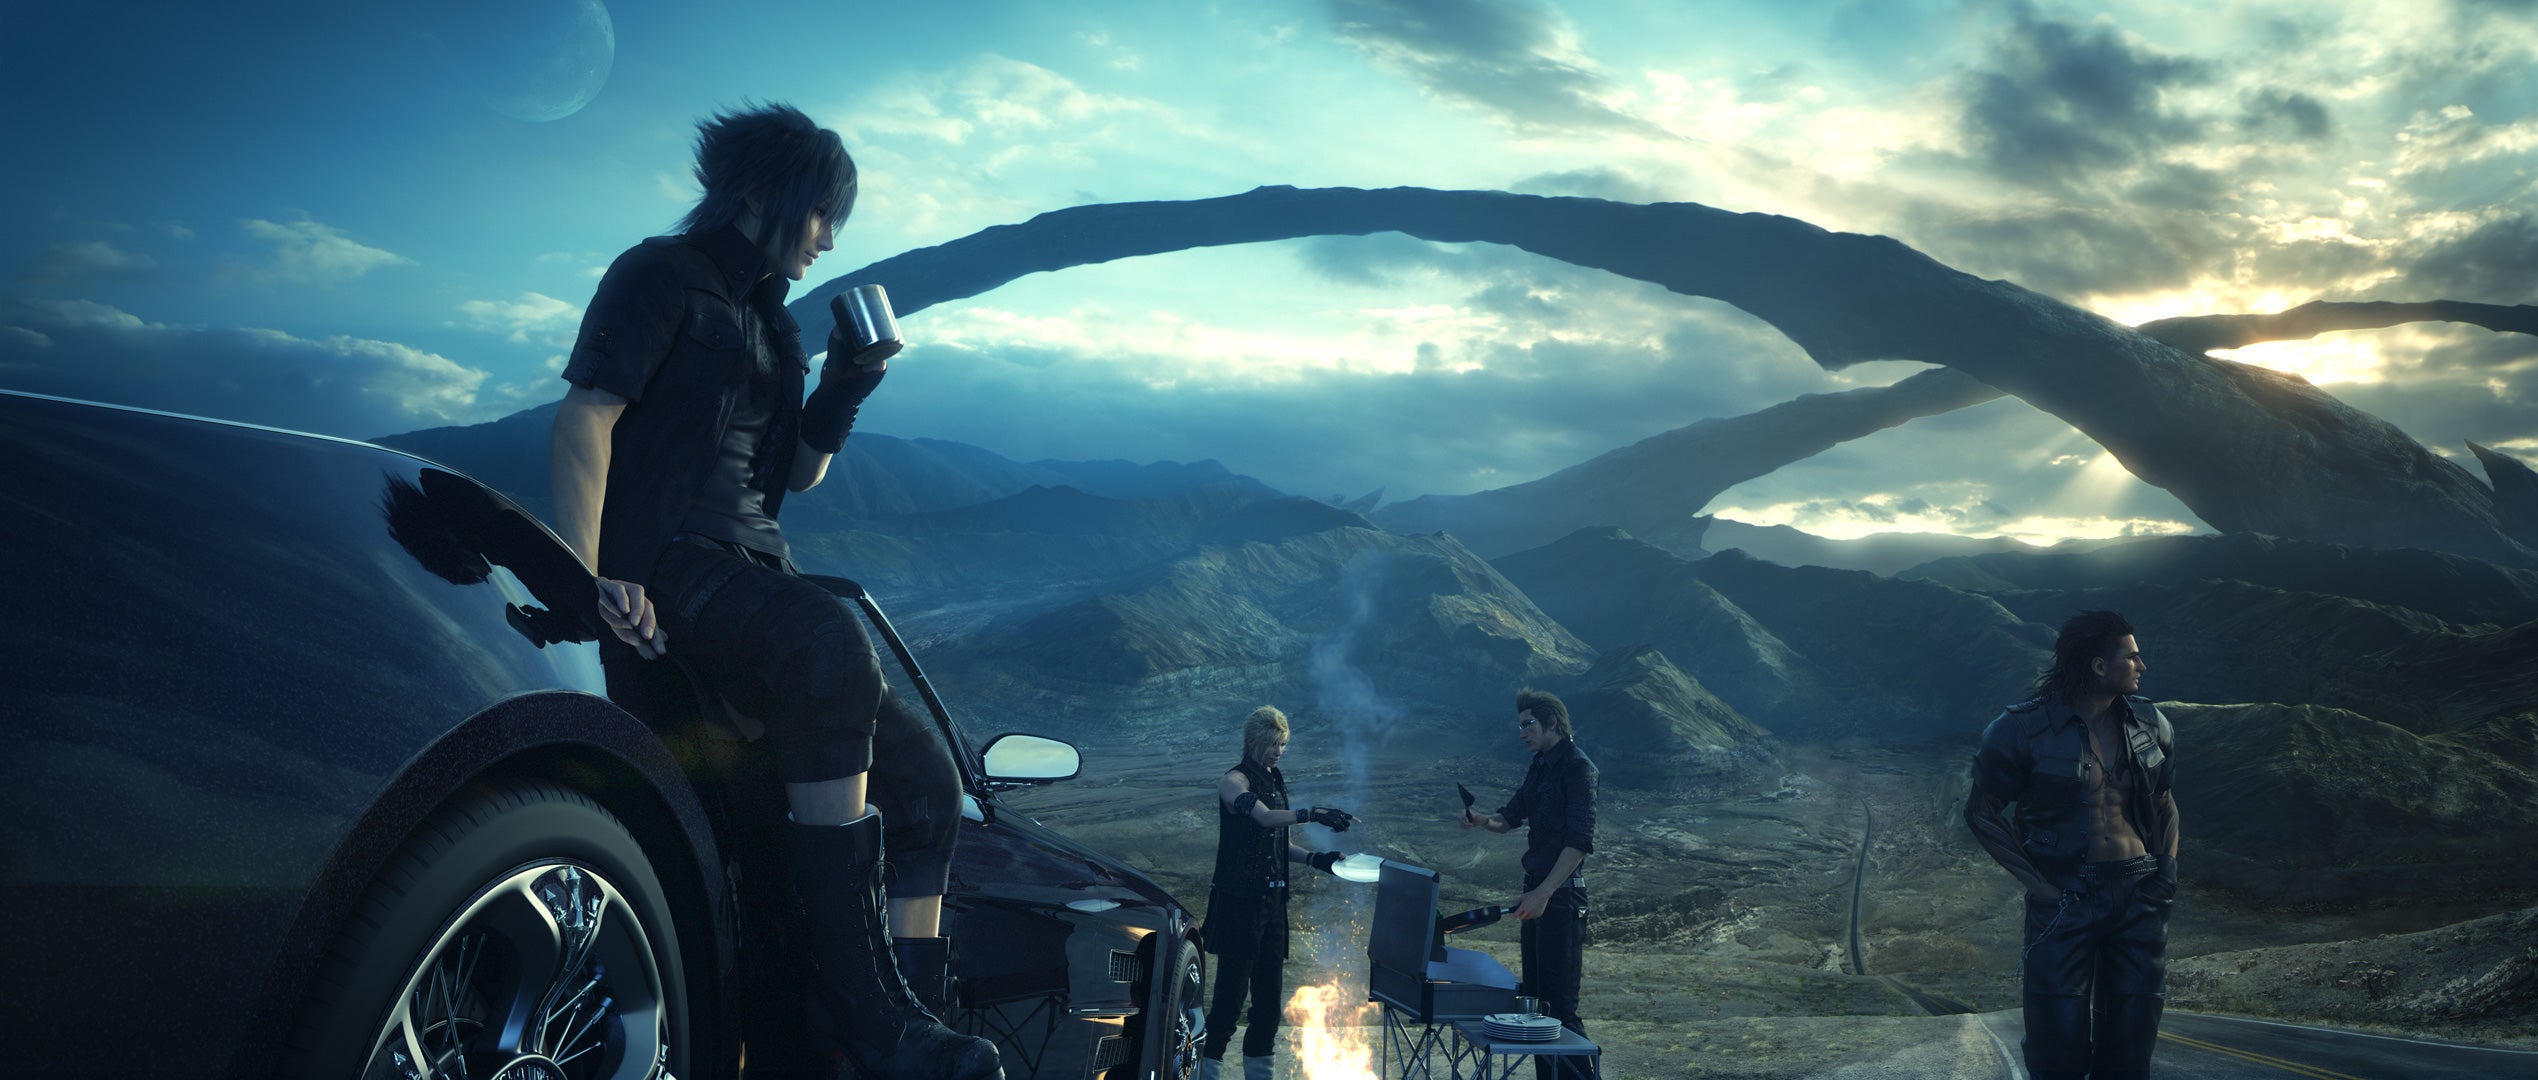 Engaging the Empire – Final Fantasy XV Guide